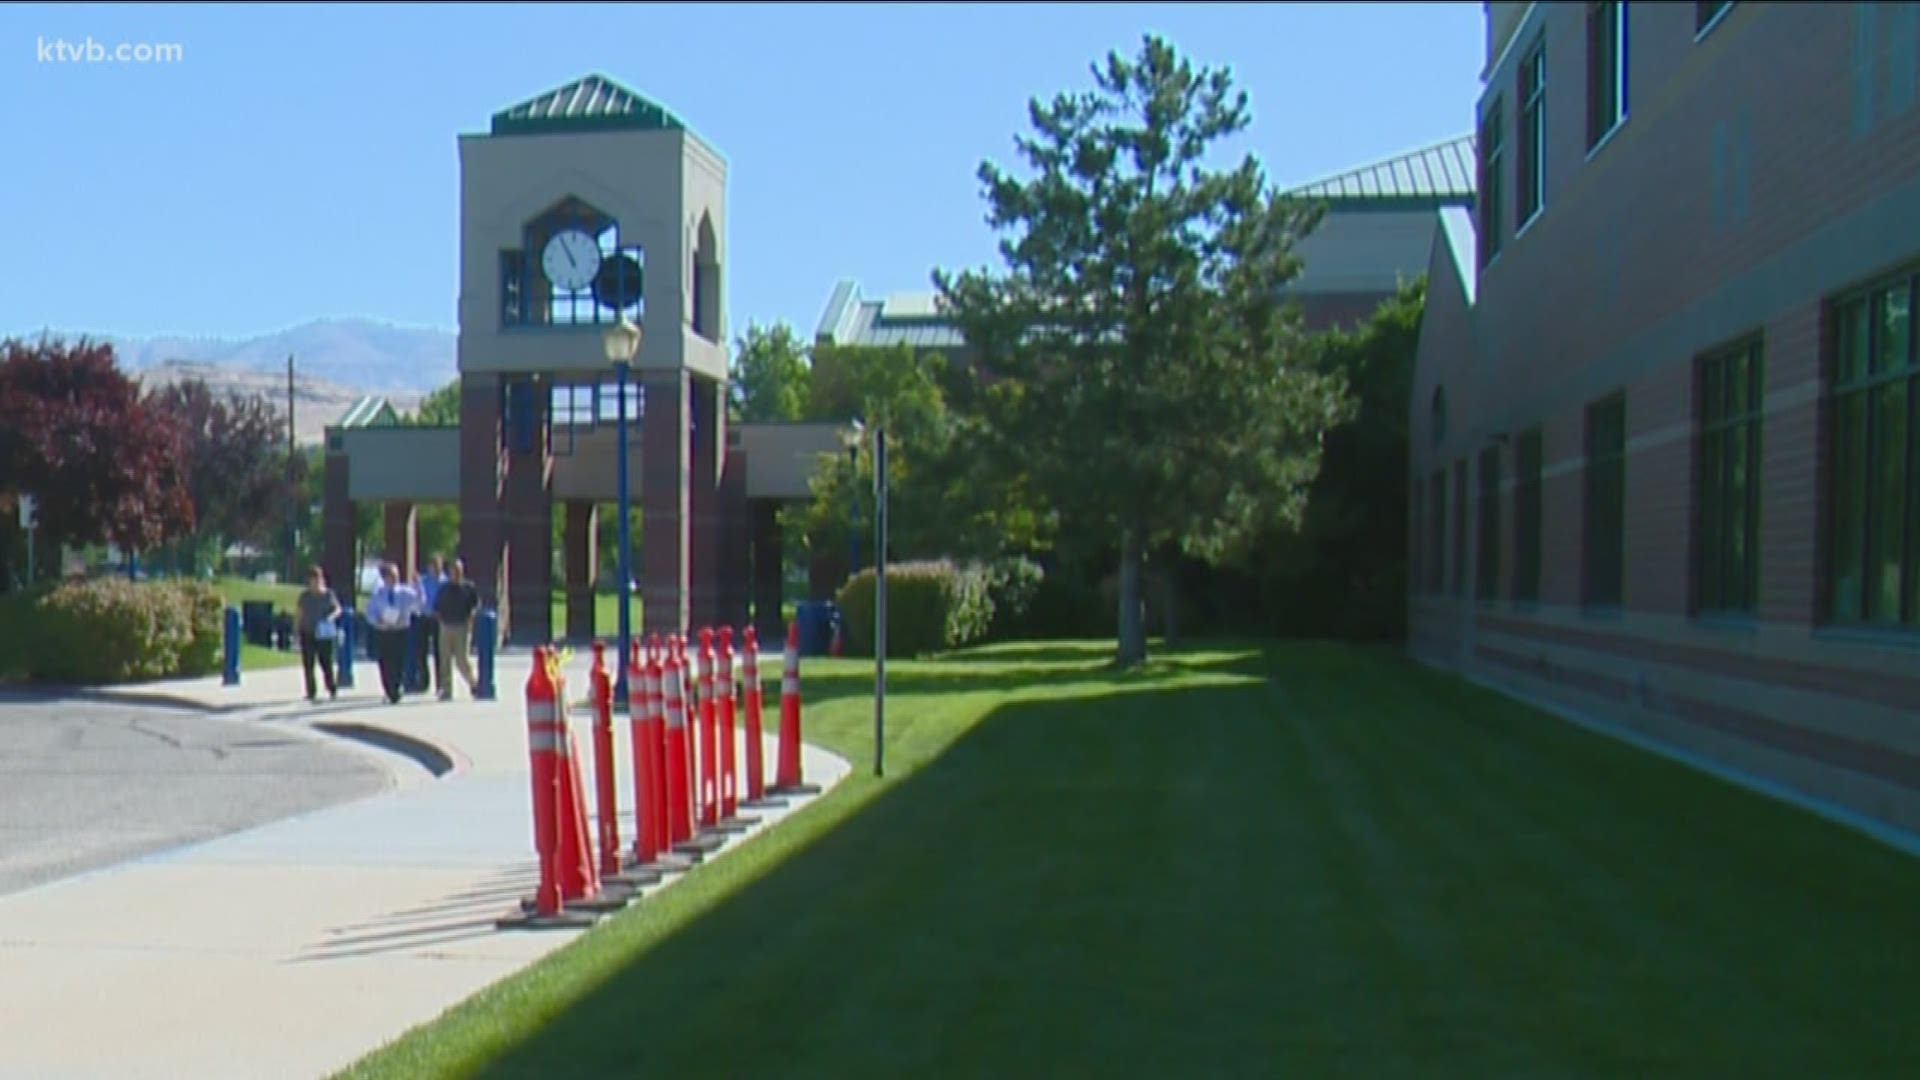 Timberline is the latest school to release plans for when students head back to class amid the coronavirus pandemic.